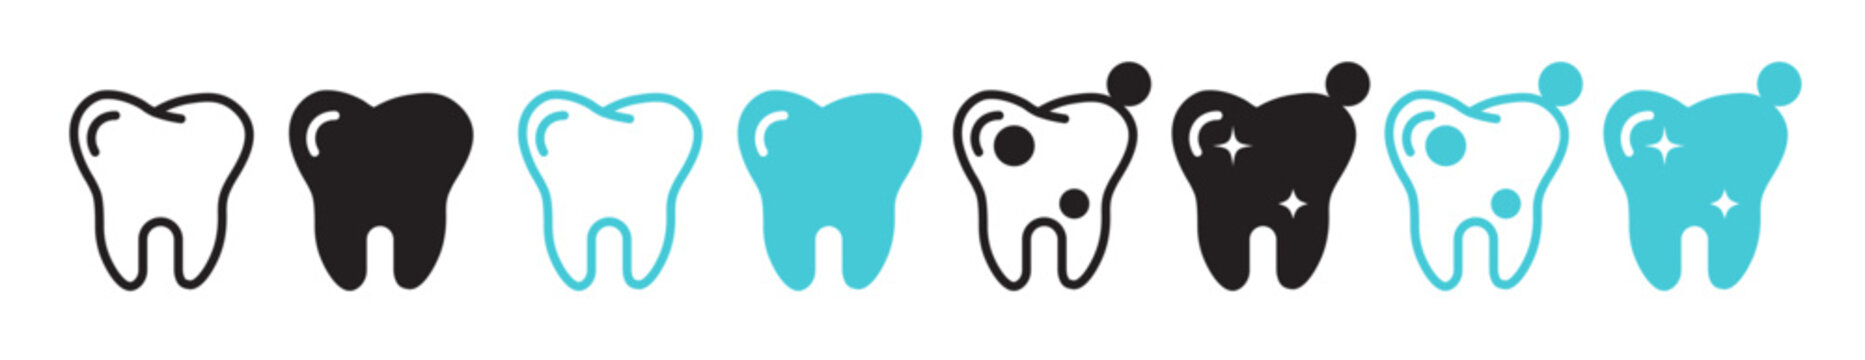 Healthy tooth vector icon set in black and blue color. Clean shiny tooth icon set. Teeth whitening symbol. Dental pictogram.